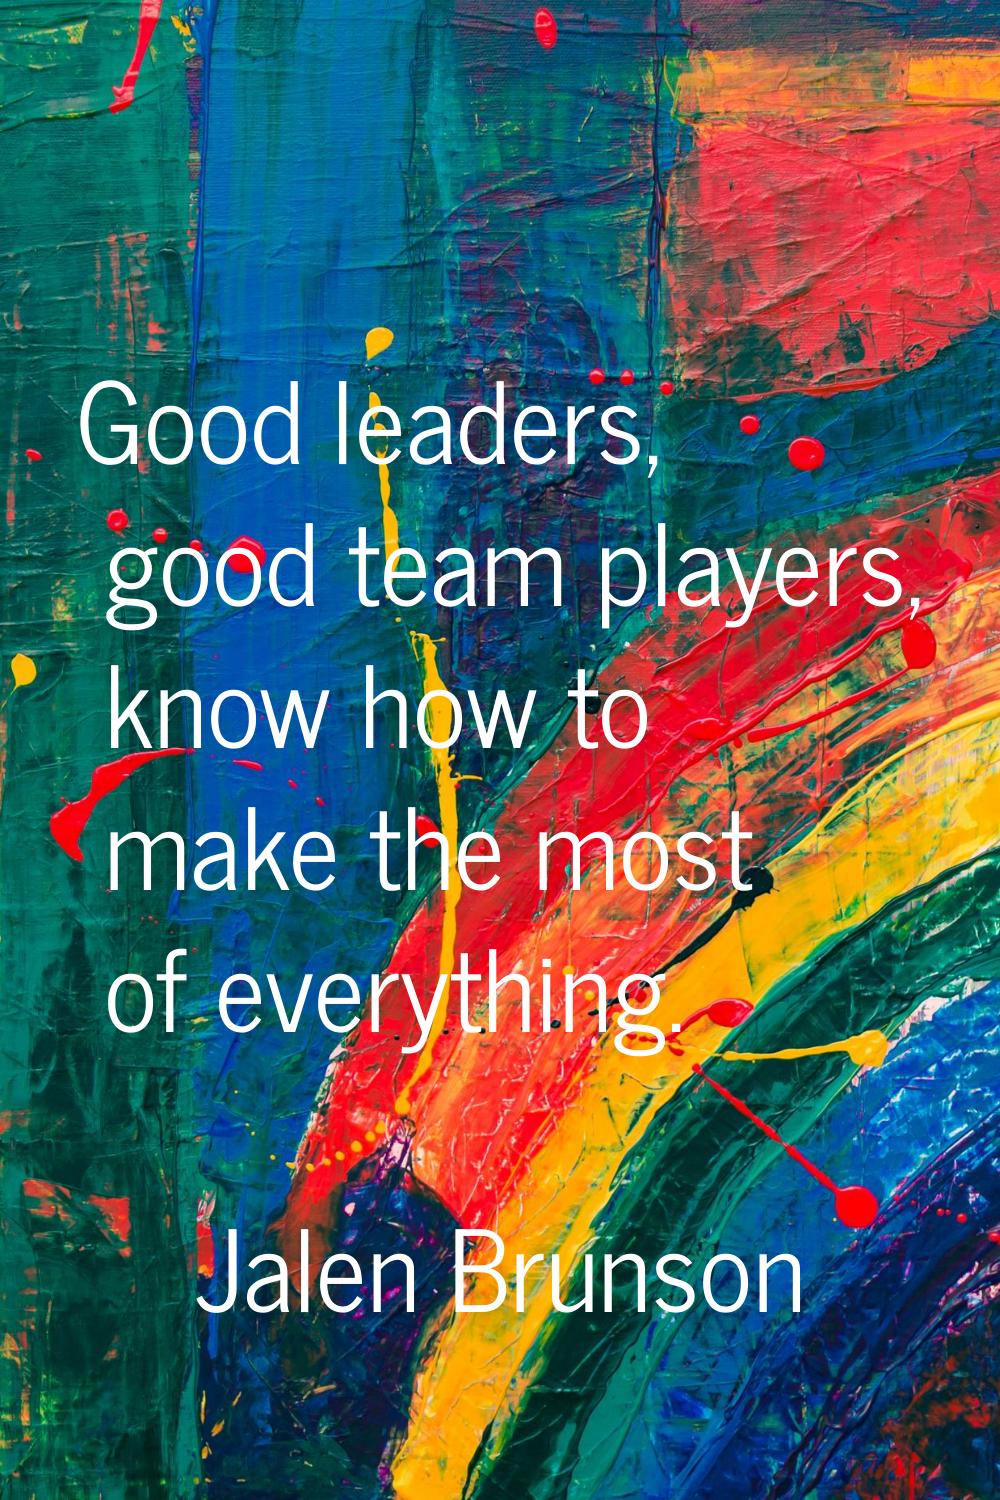 Good leaders, good team players, know how to make the most of everything.